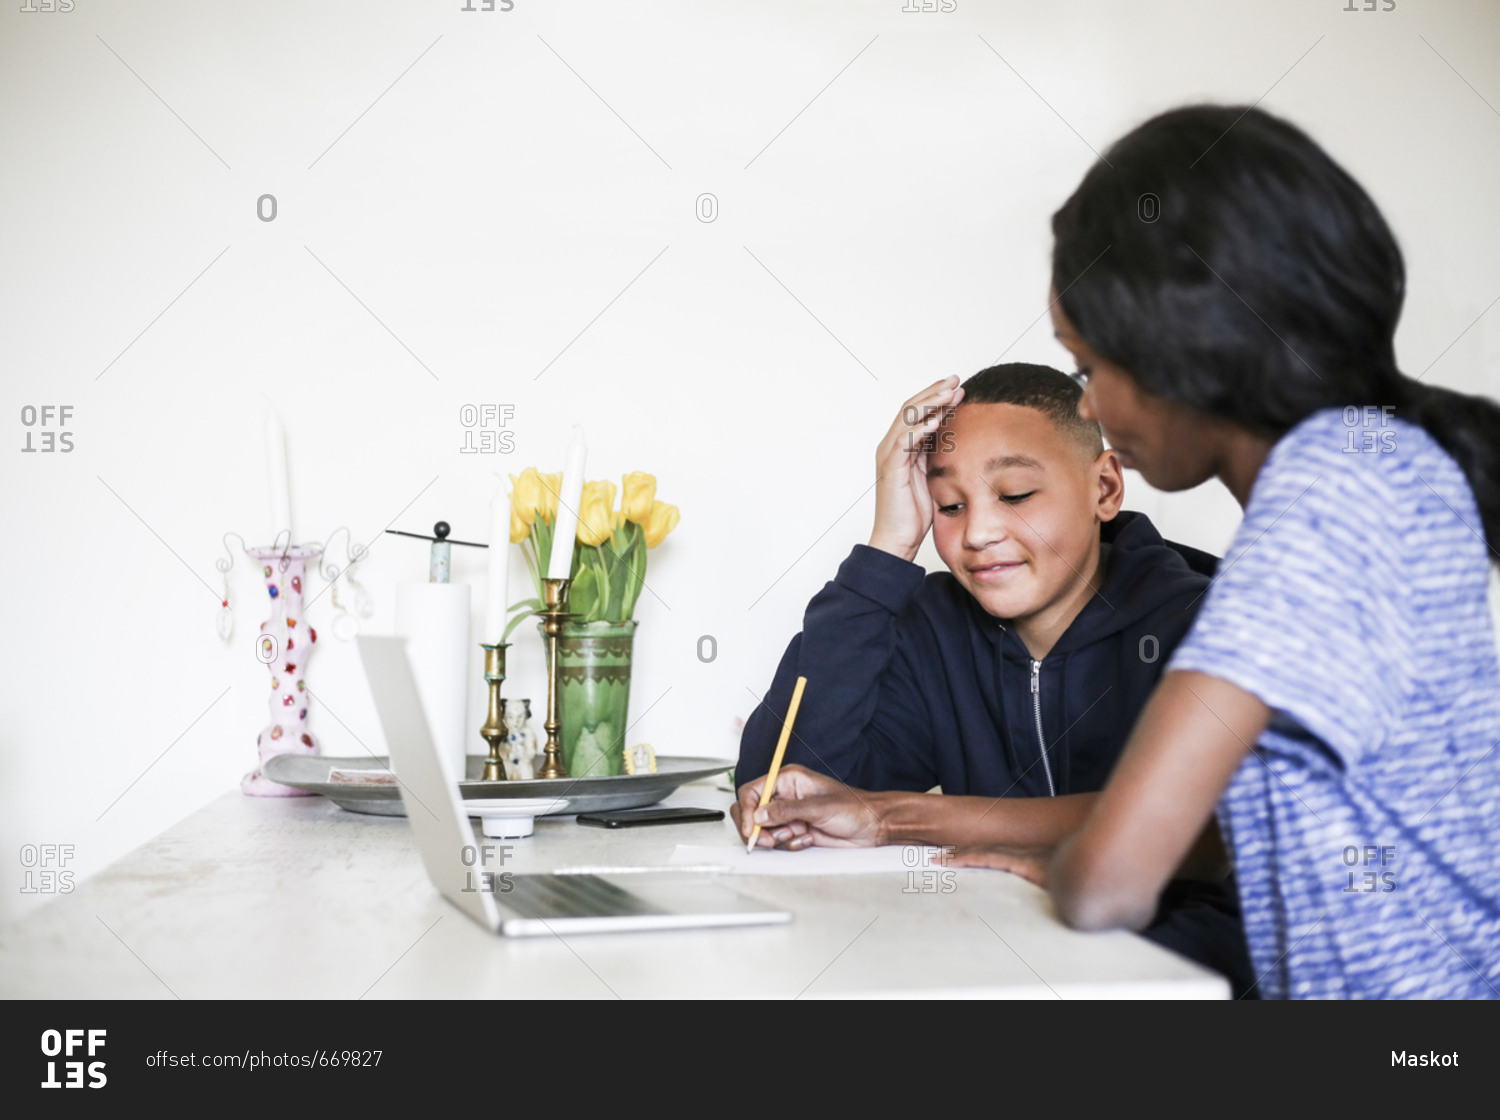 Mother helping son. Ron and Michael ___ at the Table and doing their homework.. Does your son